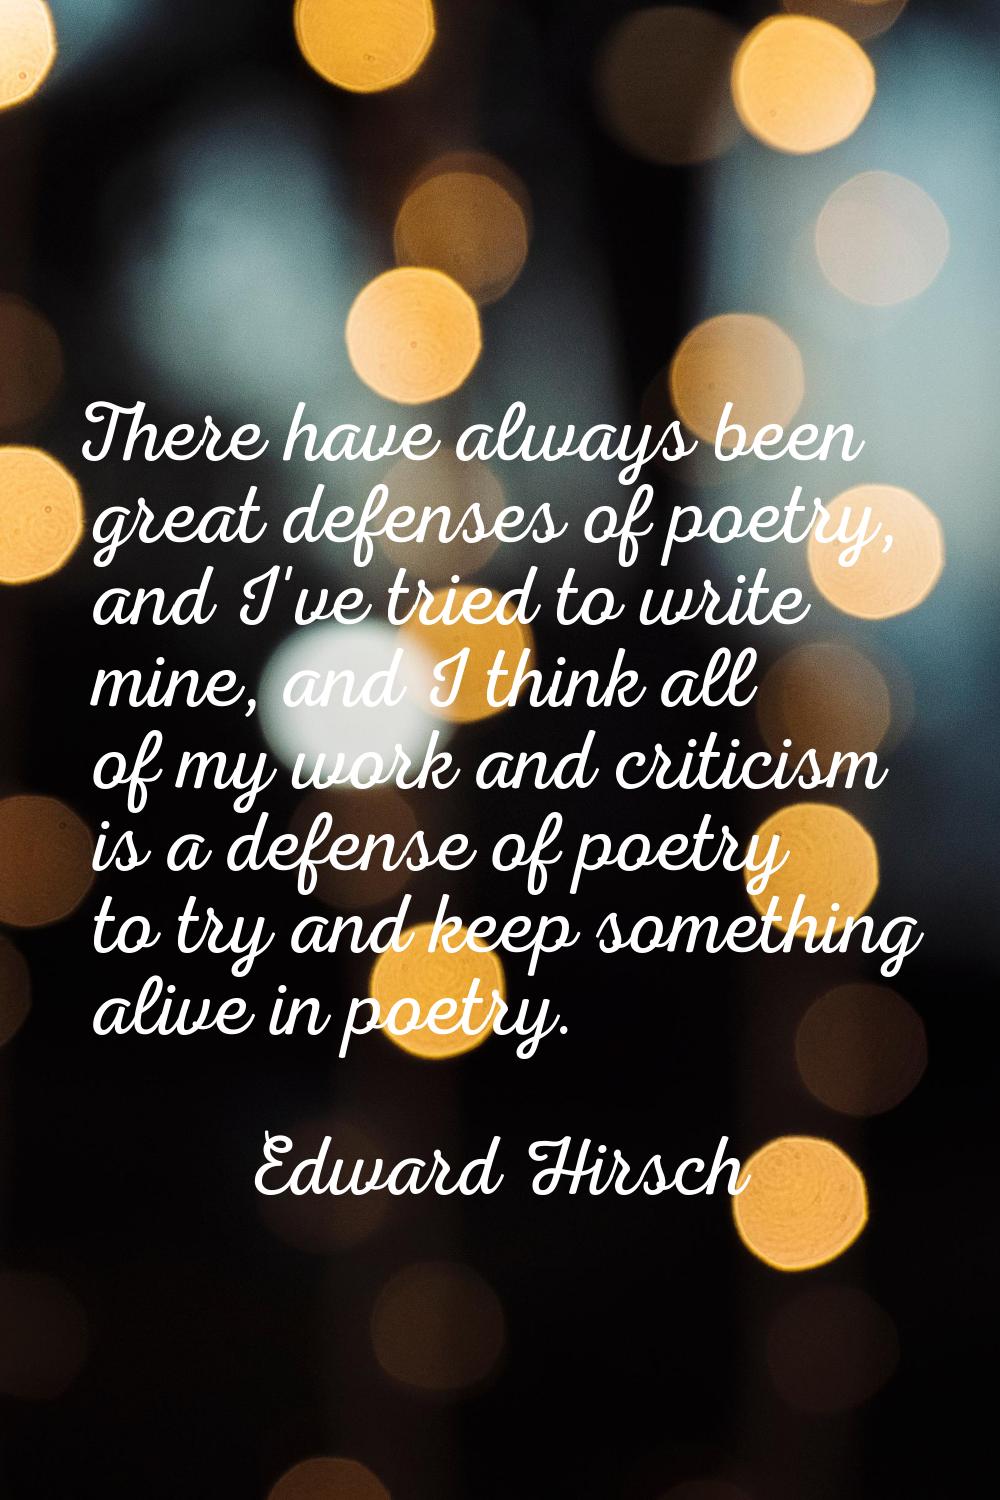 There have always been great defenses of poetry, and I've tried to write mine, and I think all of m